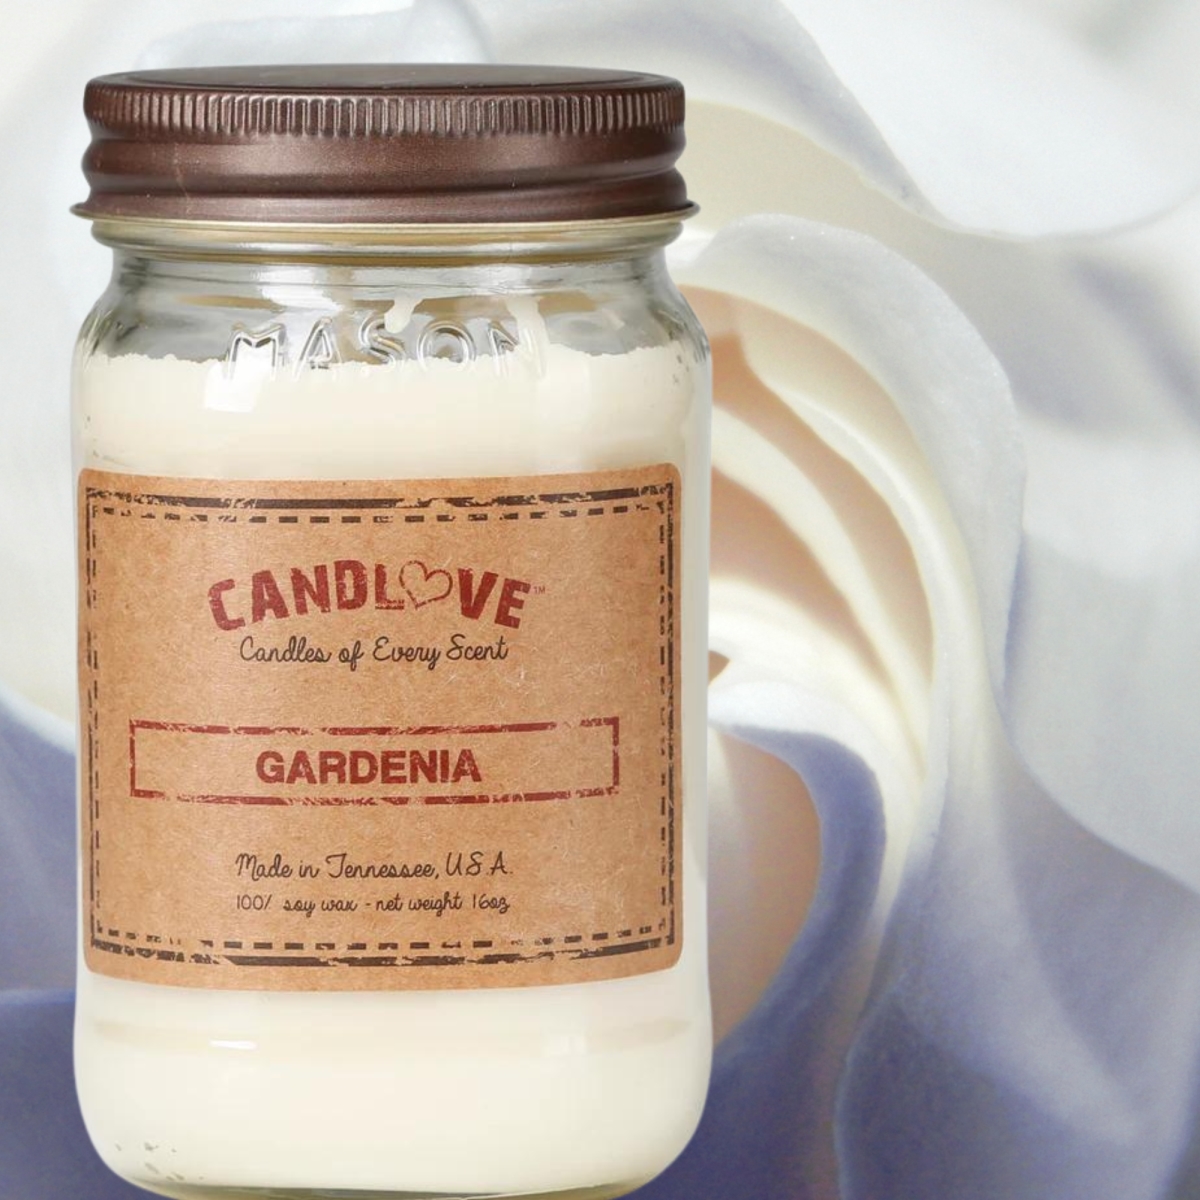 Picture of PPI SUPPLIES Gardenia-C Candlove Gardenia Scented Candle - Non-Toxic 100% Soy Candle - Handmade & Hand Poured Long Burning Candle - Highly Scented All Natural Clean Burning Candle (16 OZ Mason Jar) Made in The USA